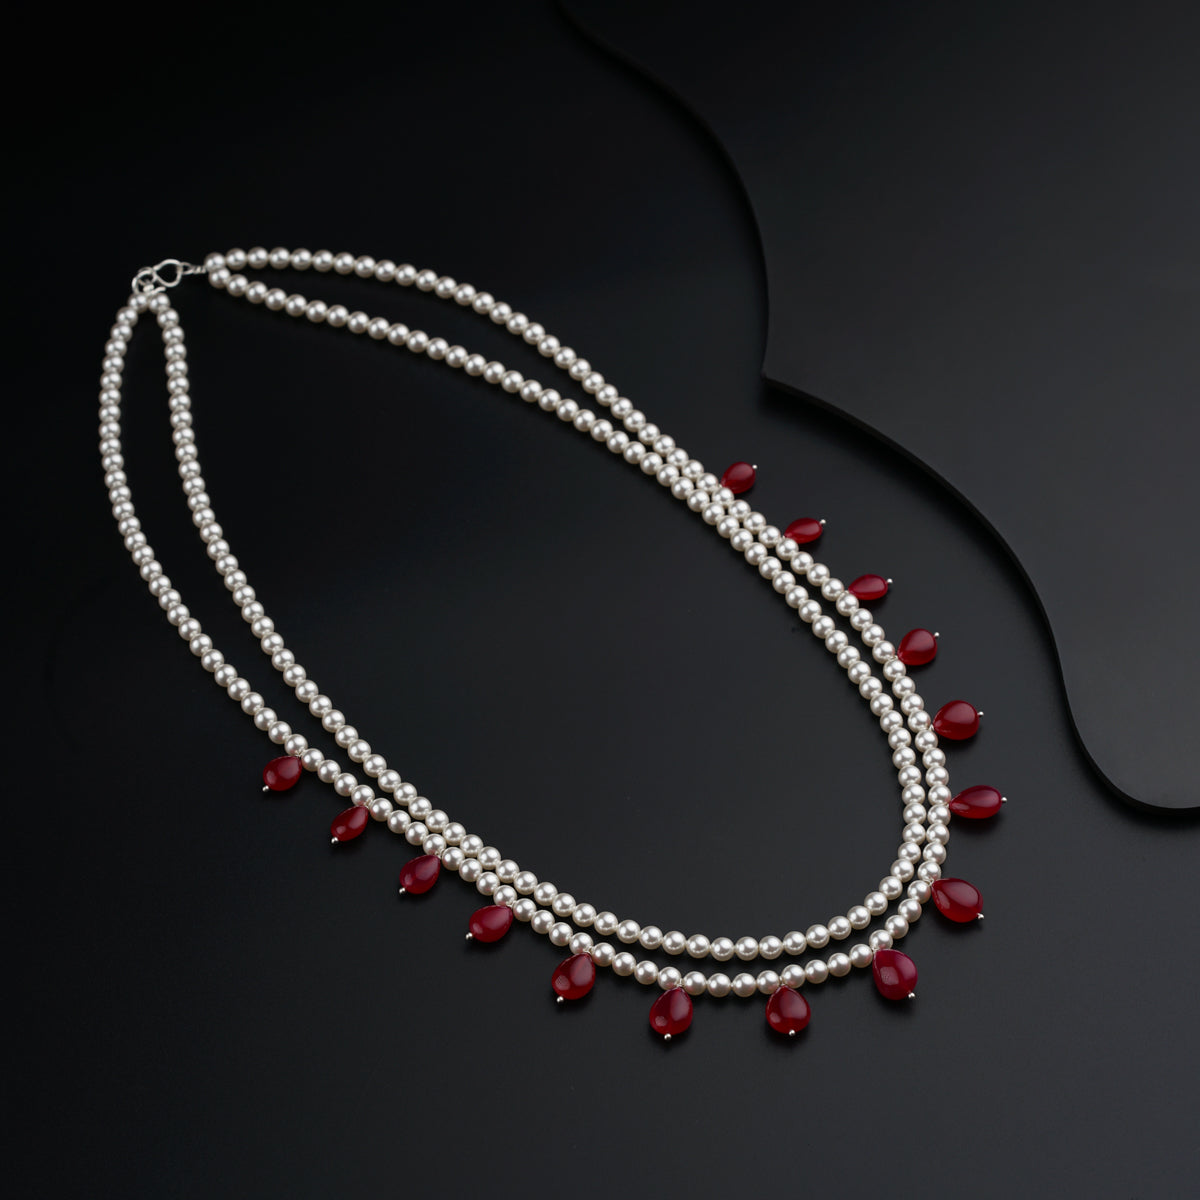 a necklace with pearls and garnets on a black surface